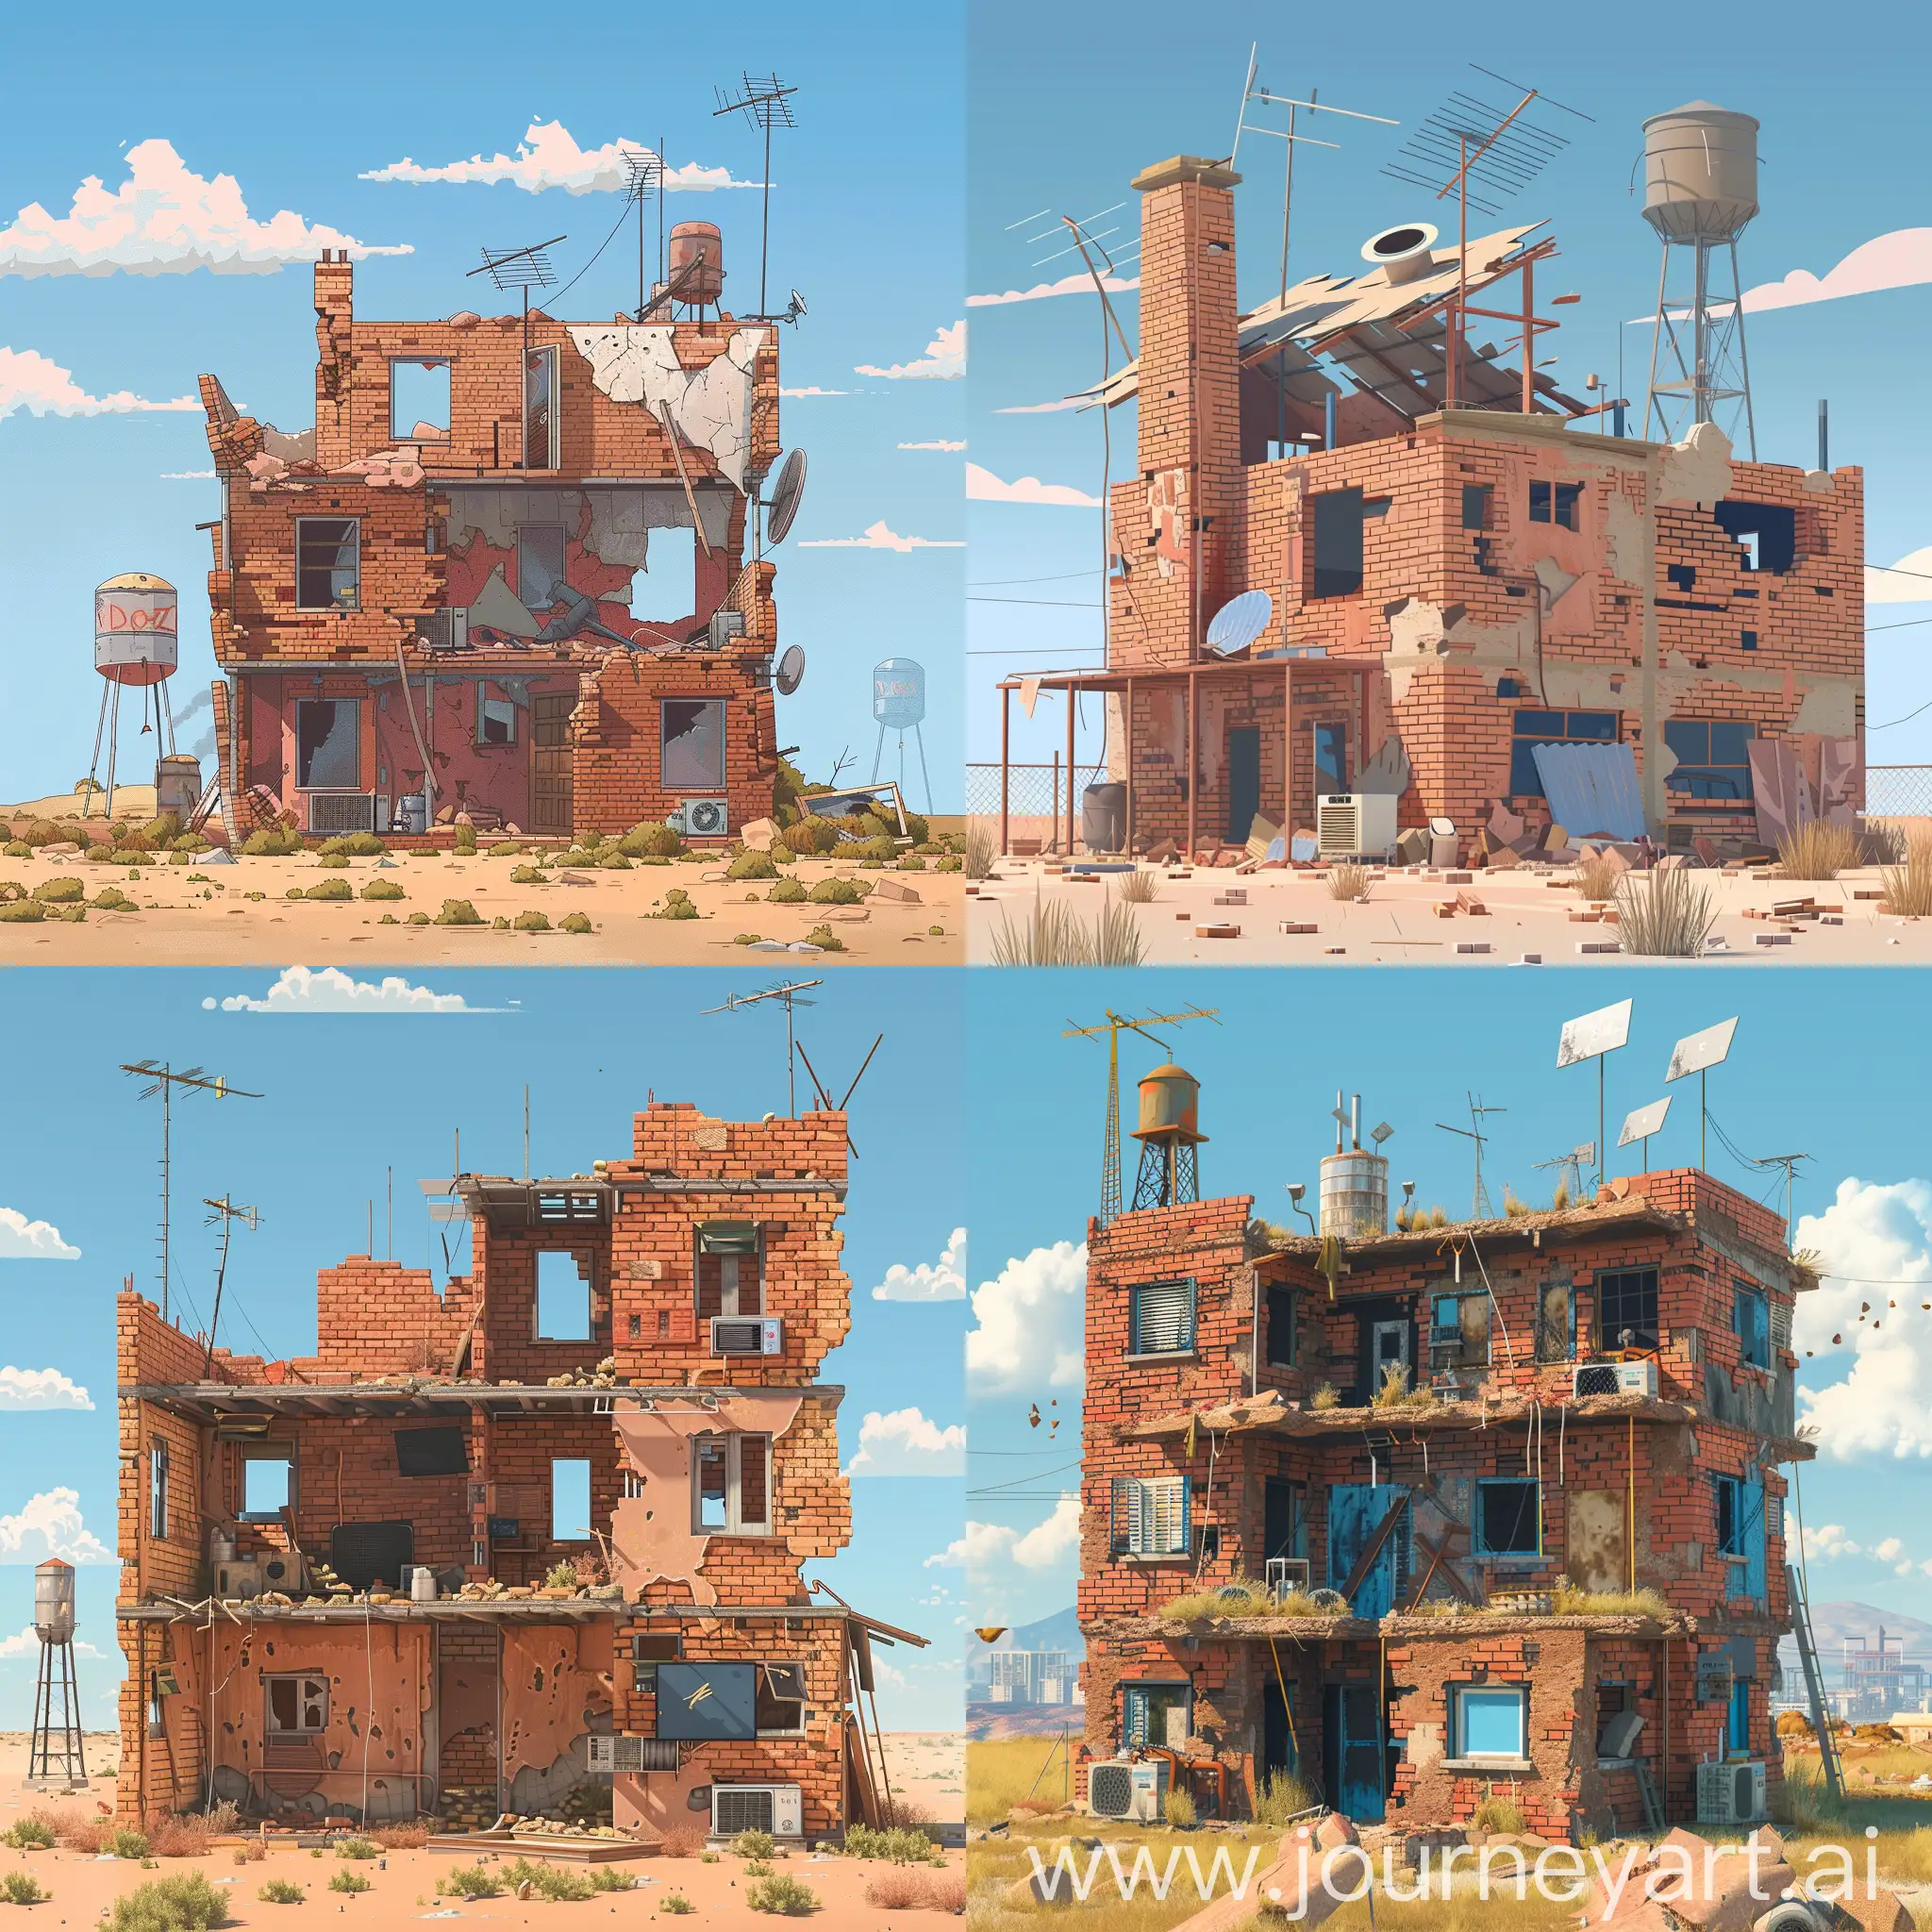 An unfinished, roofless, half-dilapidated abandoned 5-story brick residential rural house in ruins with TV antennas, water towers and air conditioners located in a dry climate in 2D.